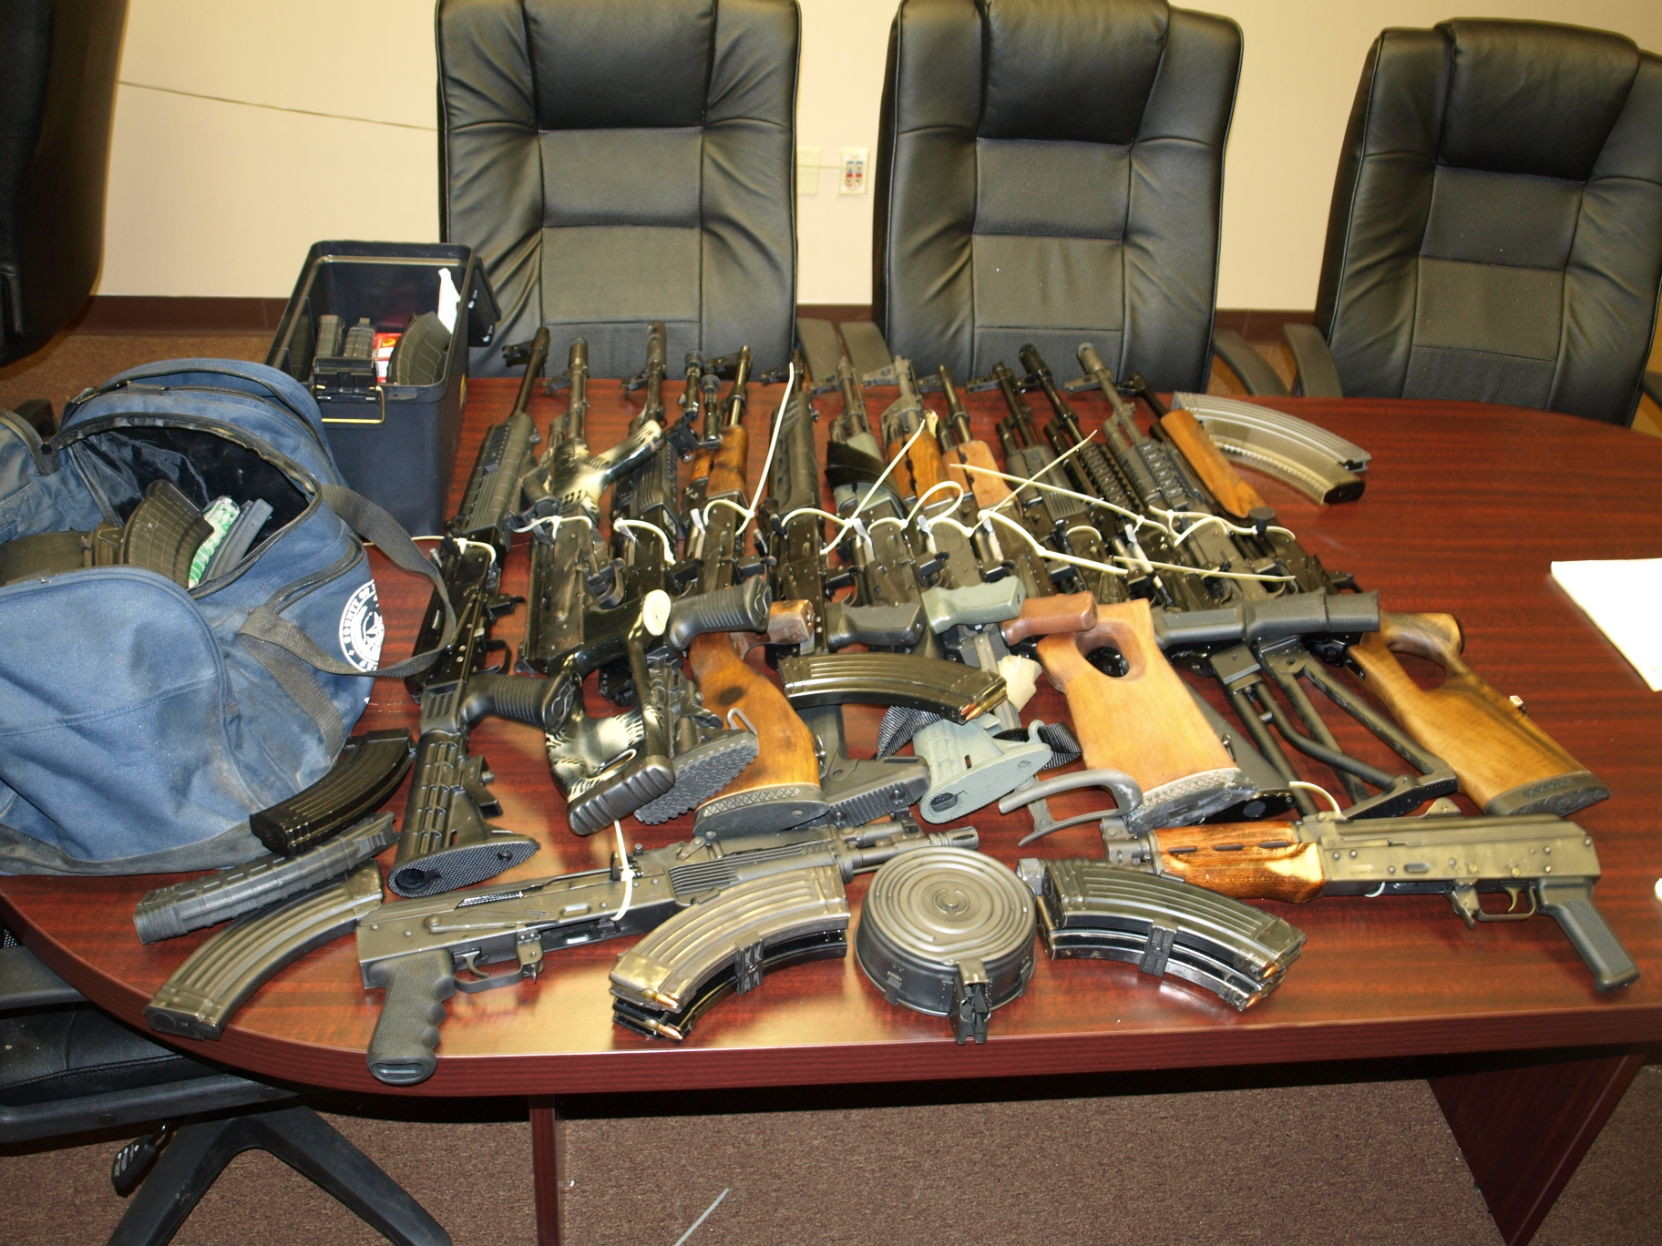 Sheriff’s deputies on Thursday arrested a convicted felon from Mission after they caught him with 14 assault rifles, 1,000 rounds of ammunition and 30 magazines and clips.